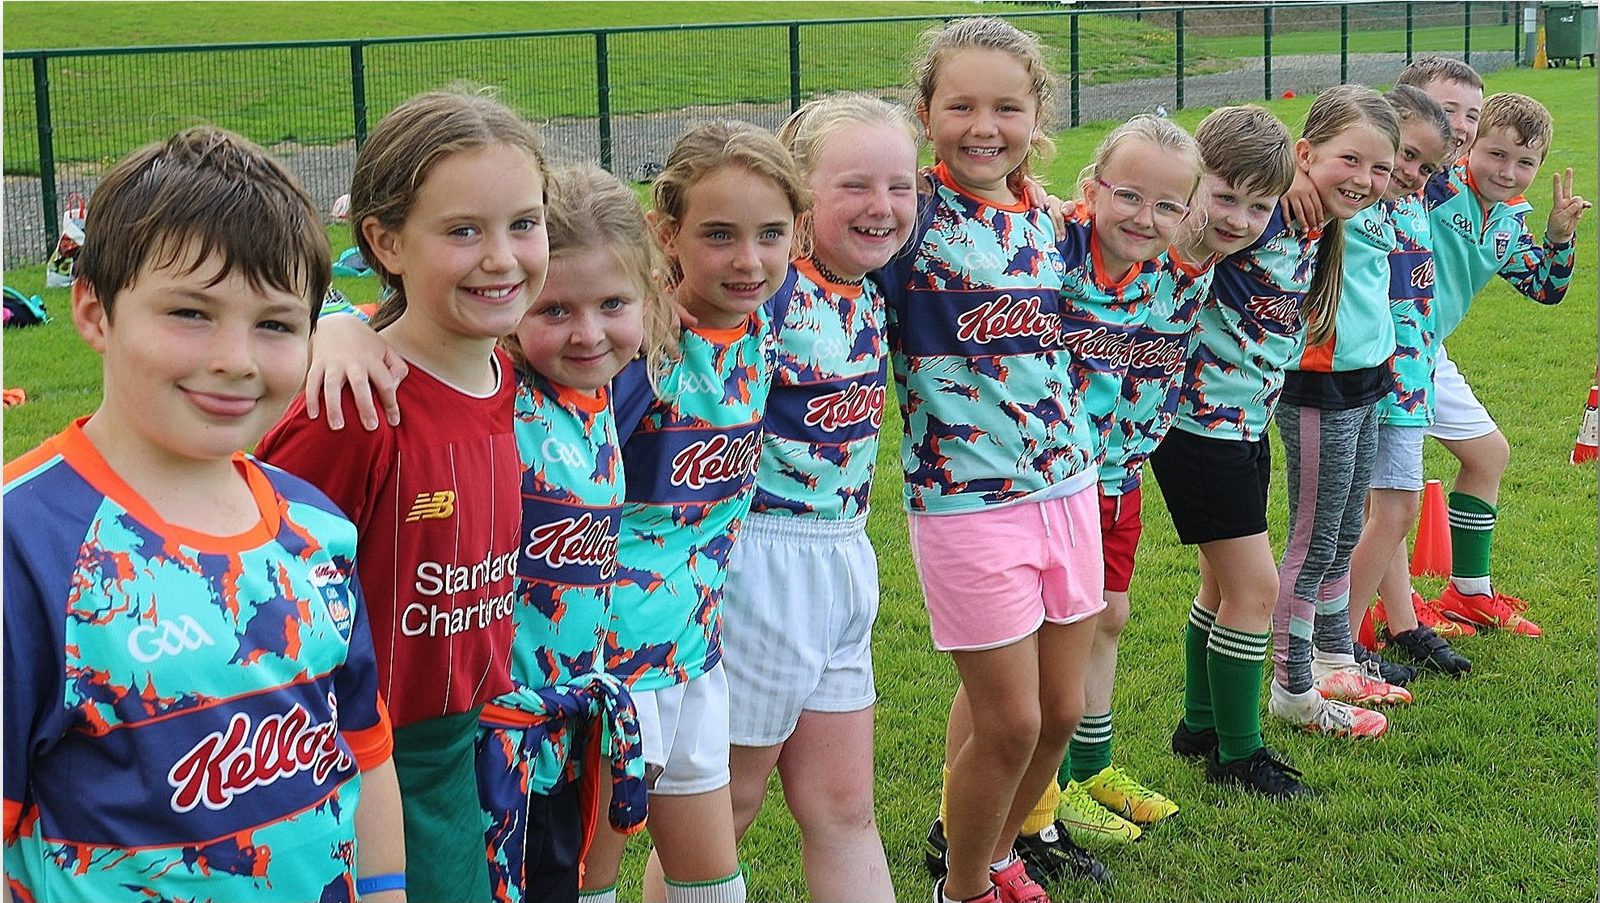 8 Weeks of the 2021 Kellogg’s Cúl Camp summer comes to an end with a record number of 6,000 Wexford Kids enjoying the GAA Fun